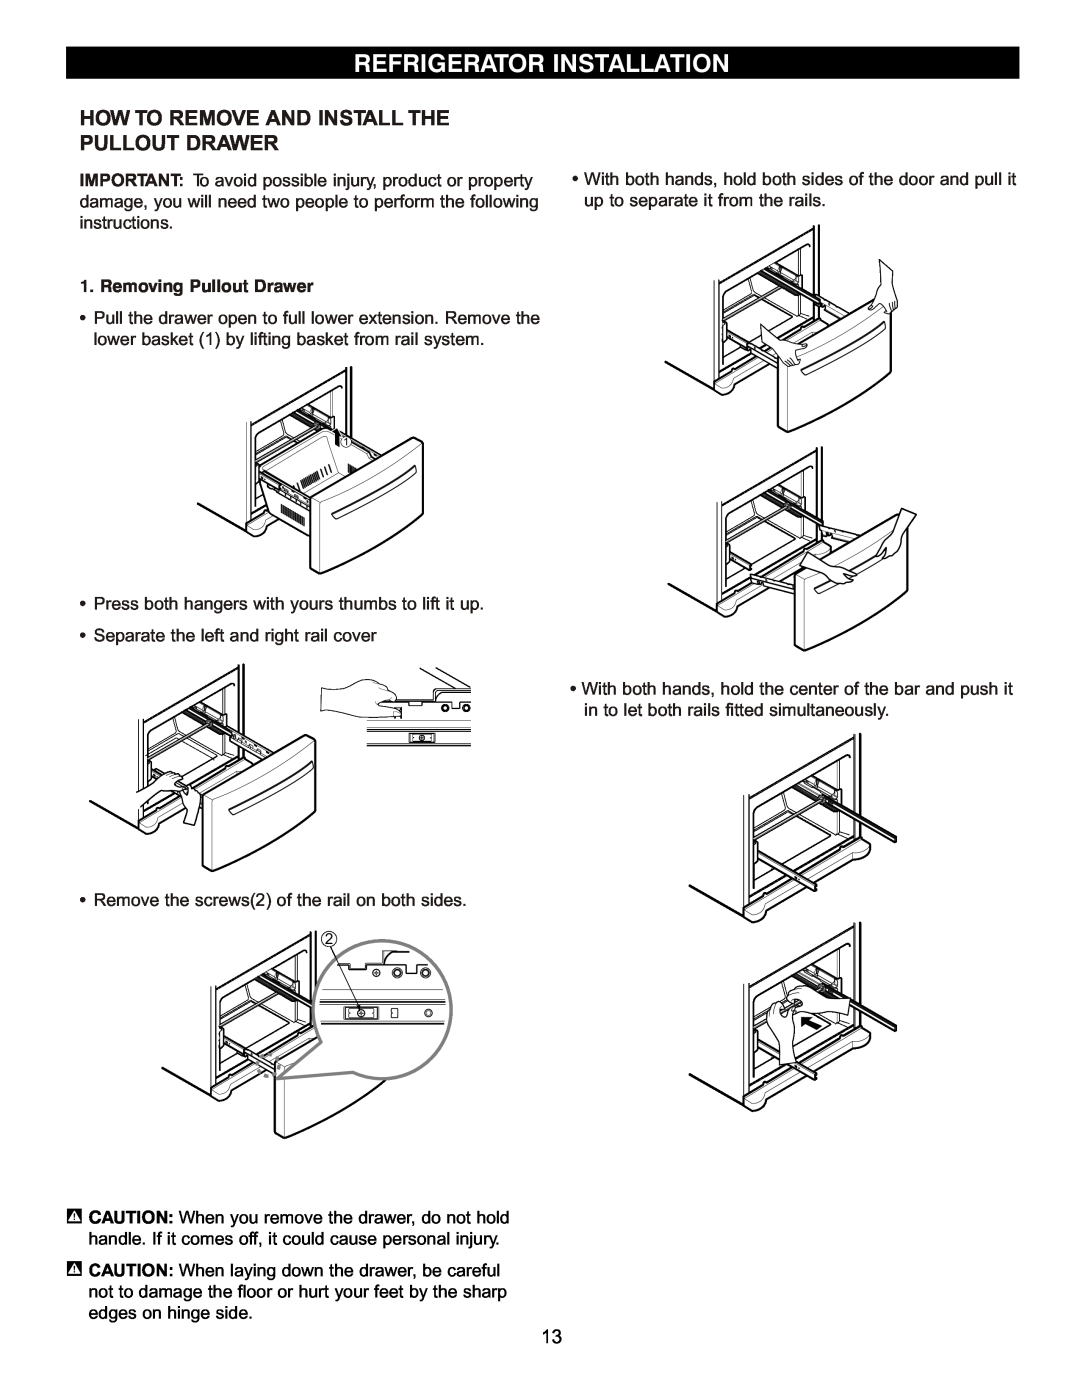 LG Electronics LDC2272 How To Remove And Install The Pullout Drawer, Refrigerator Installation, Removing Pullout Drawer 